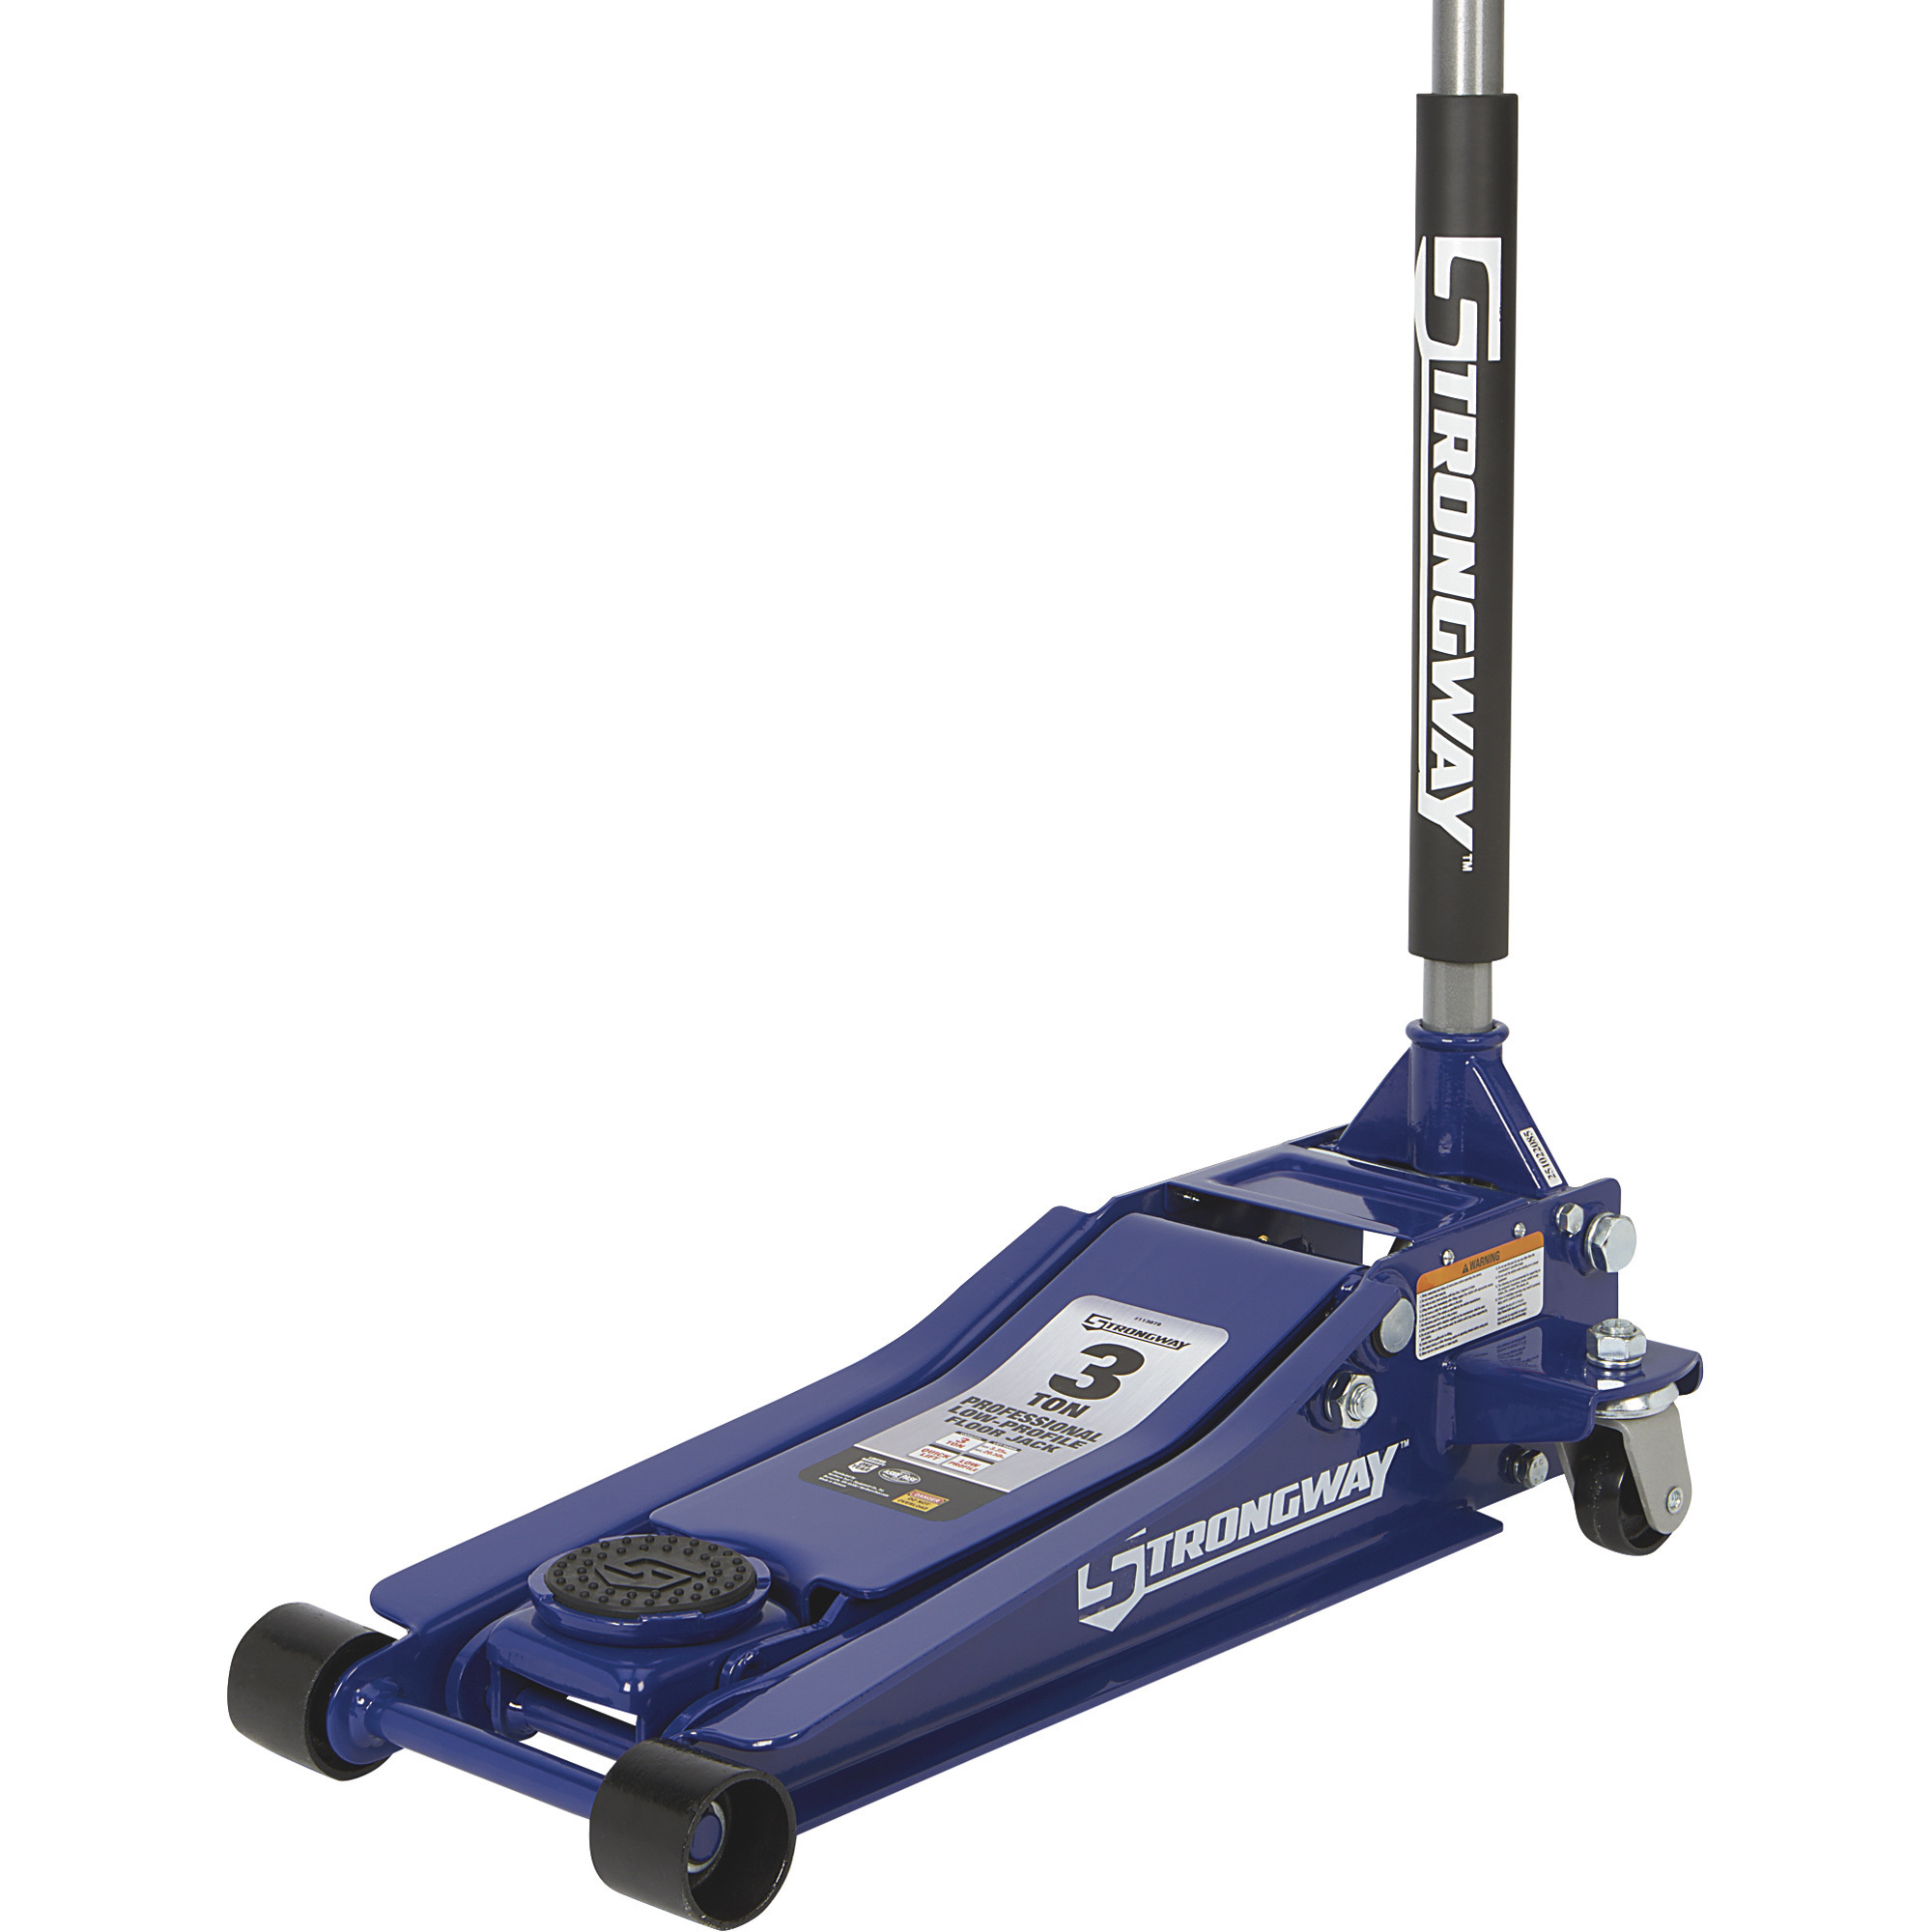 Strongway Professional Low-Profile Service Floor Jack